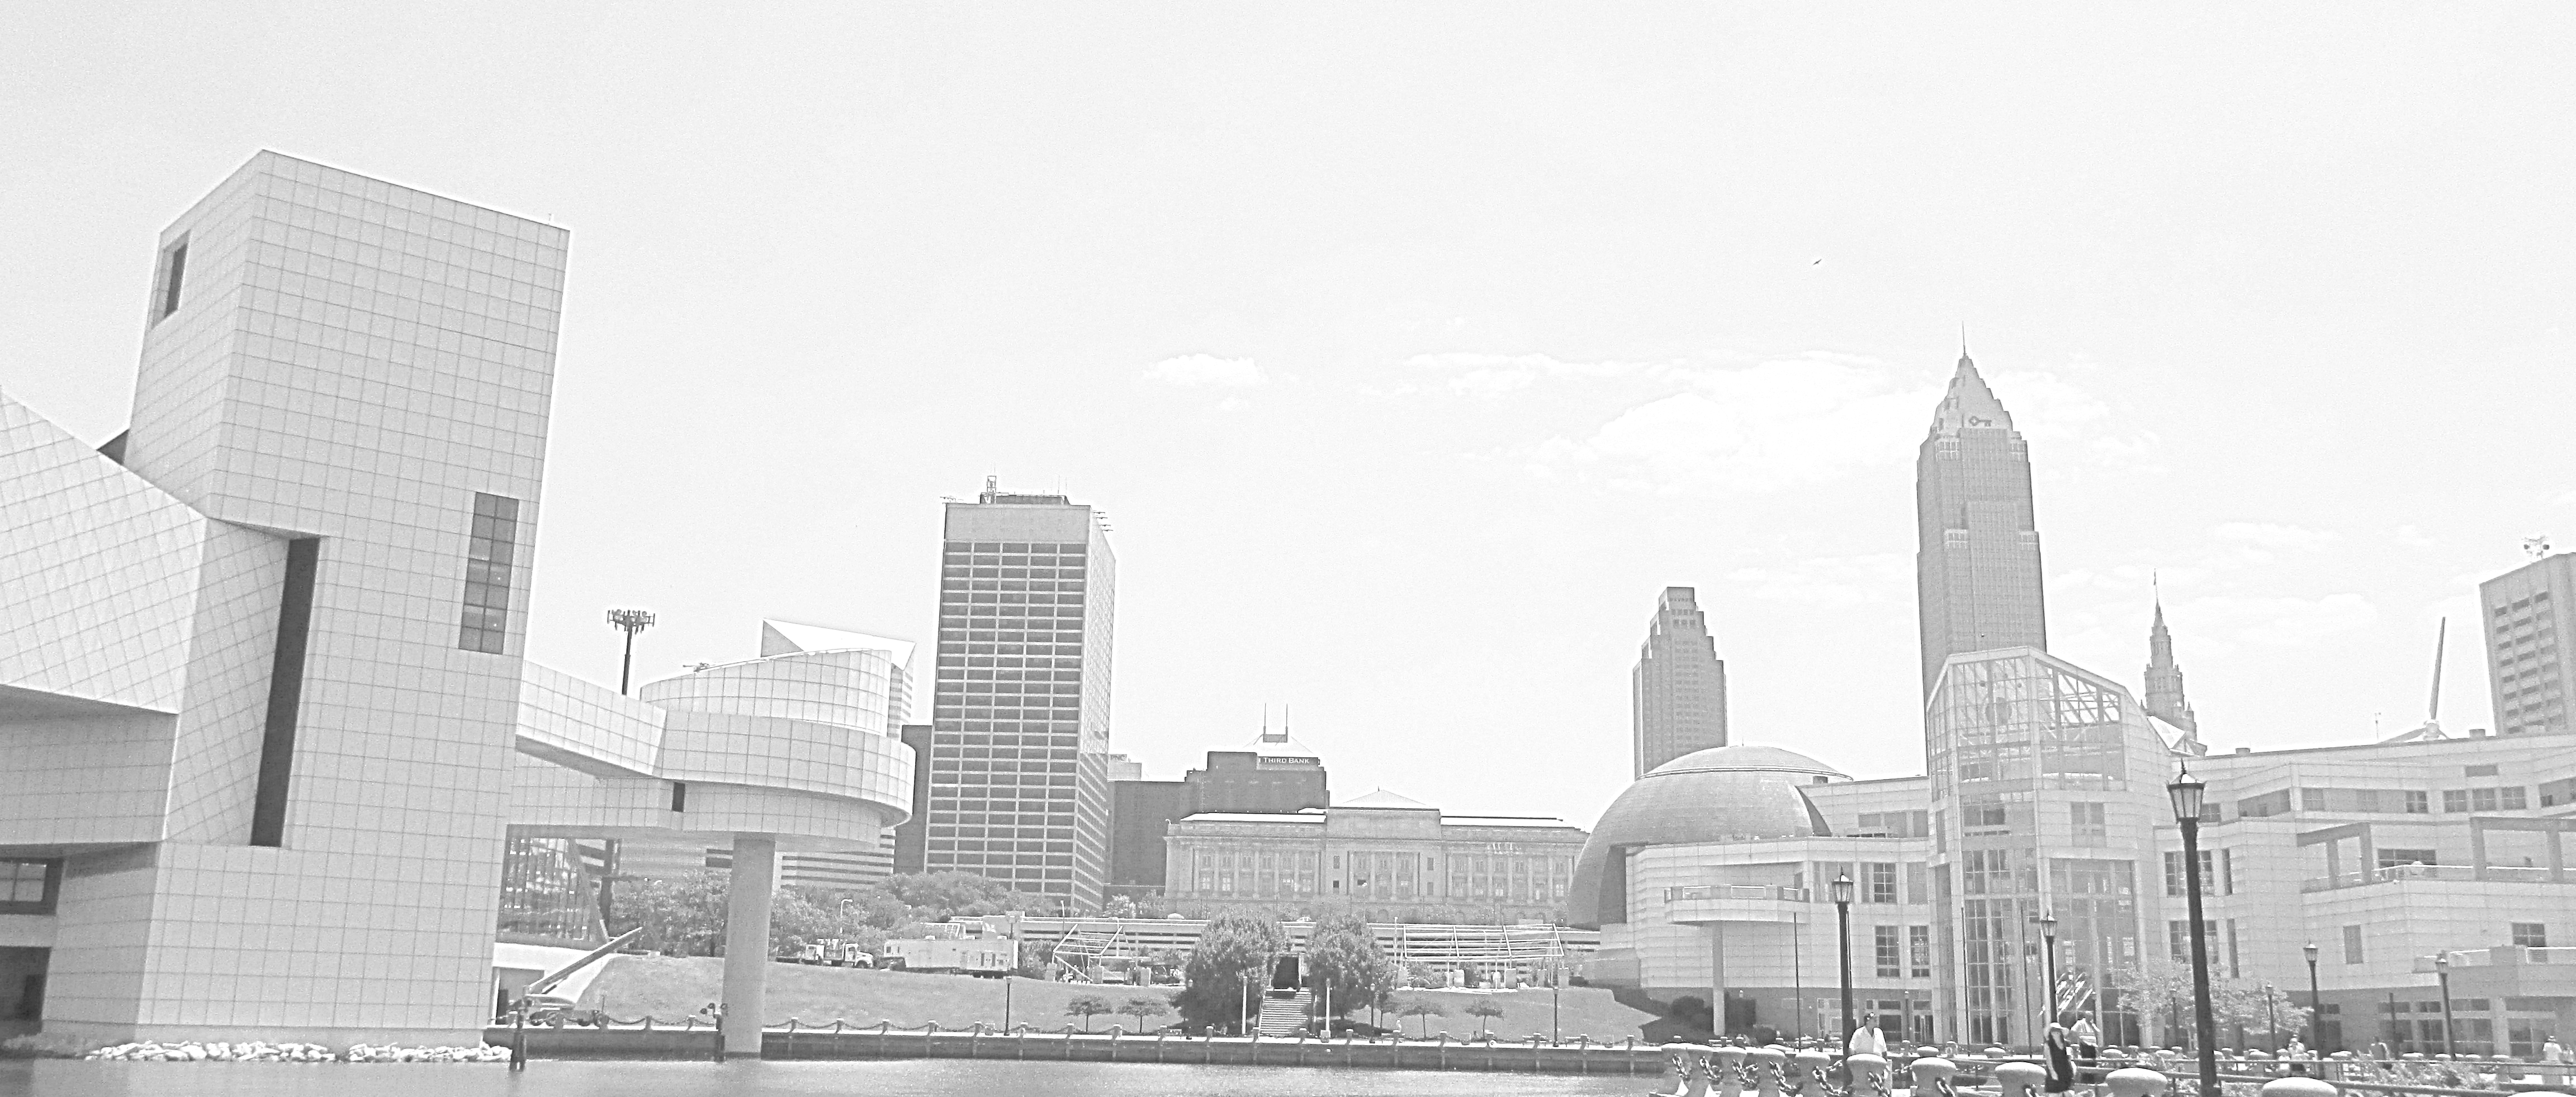 Downtown Cleveland Rock And Roll Hall Of Fame By Status0nline On